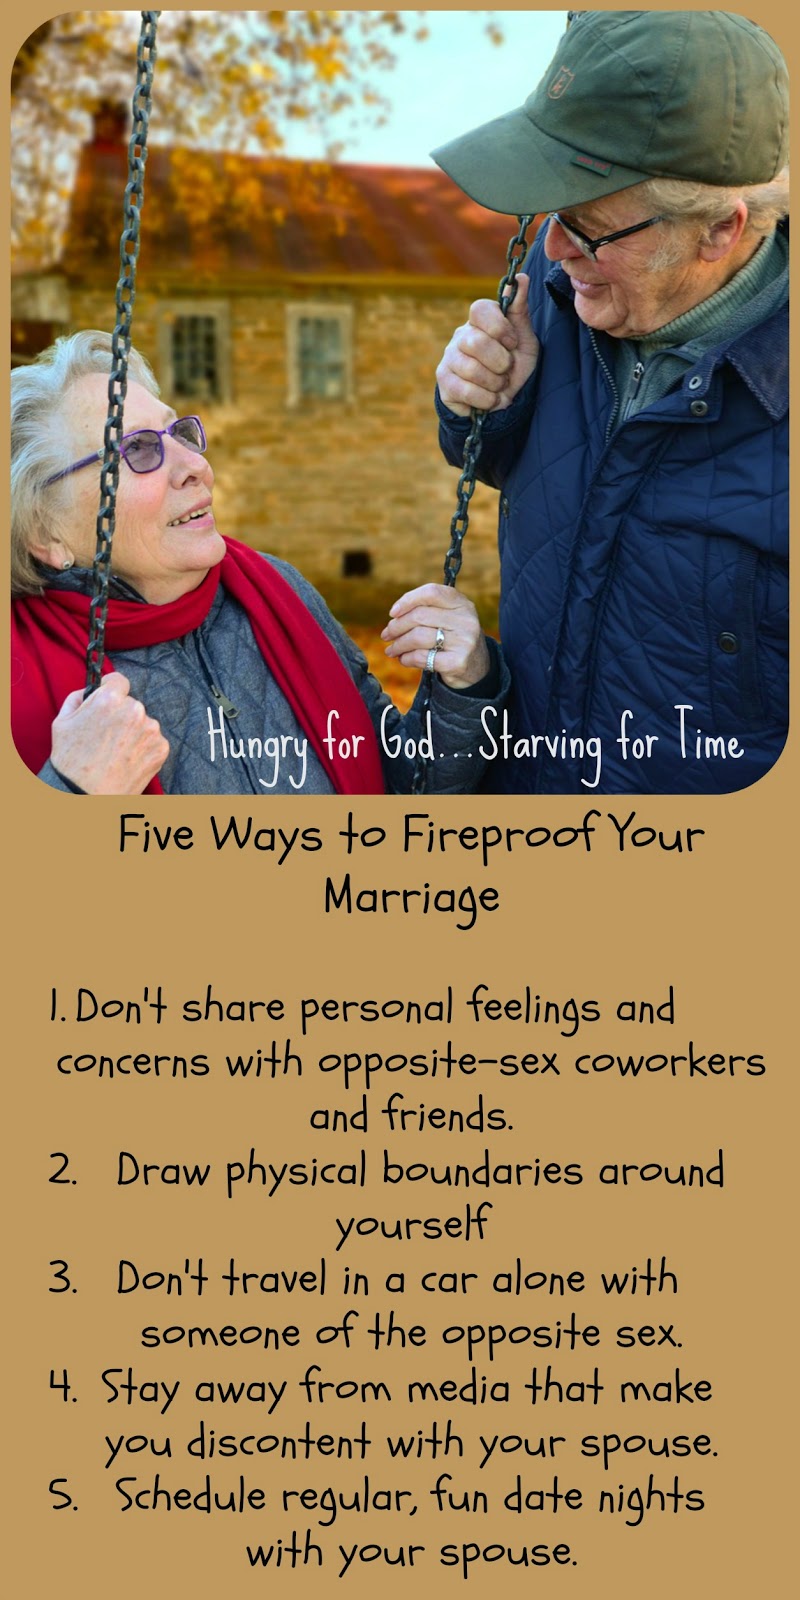 Hungry for God The Day the House Burned Down -- 5 Ways to Fireproof Your Marriage